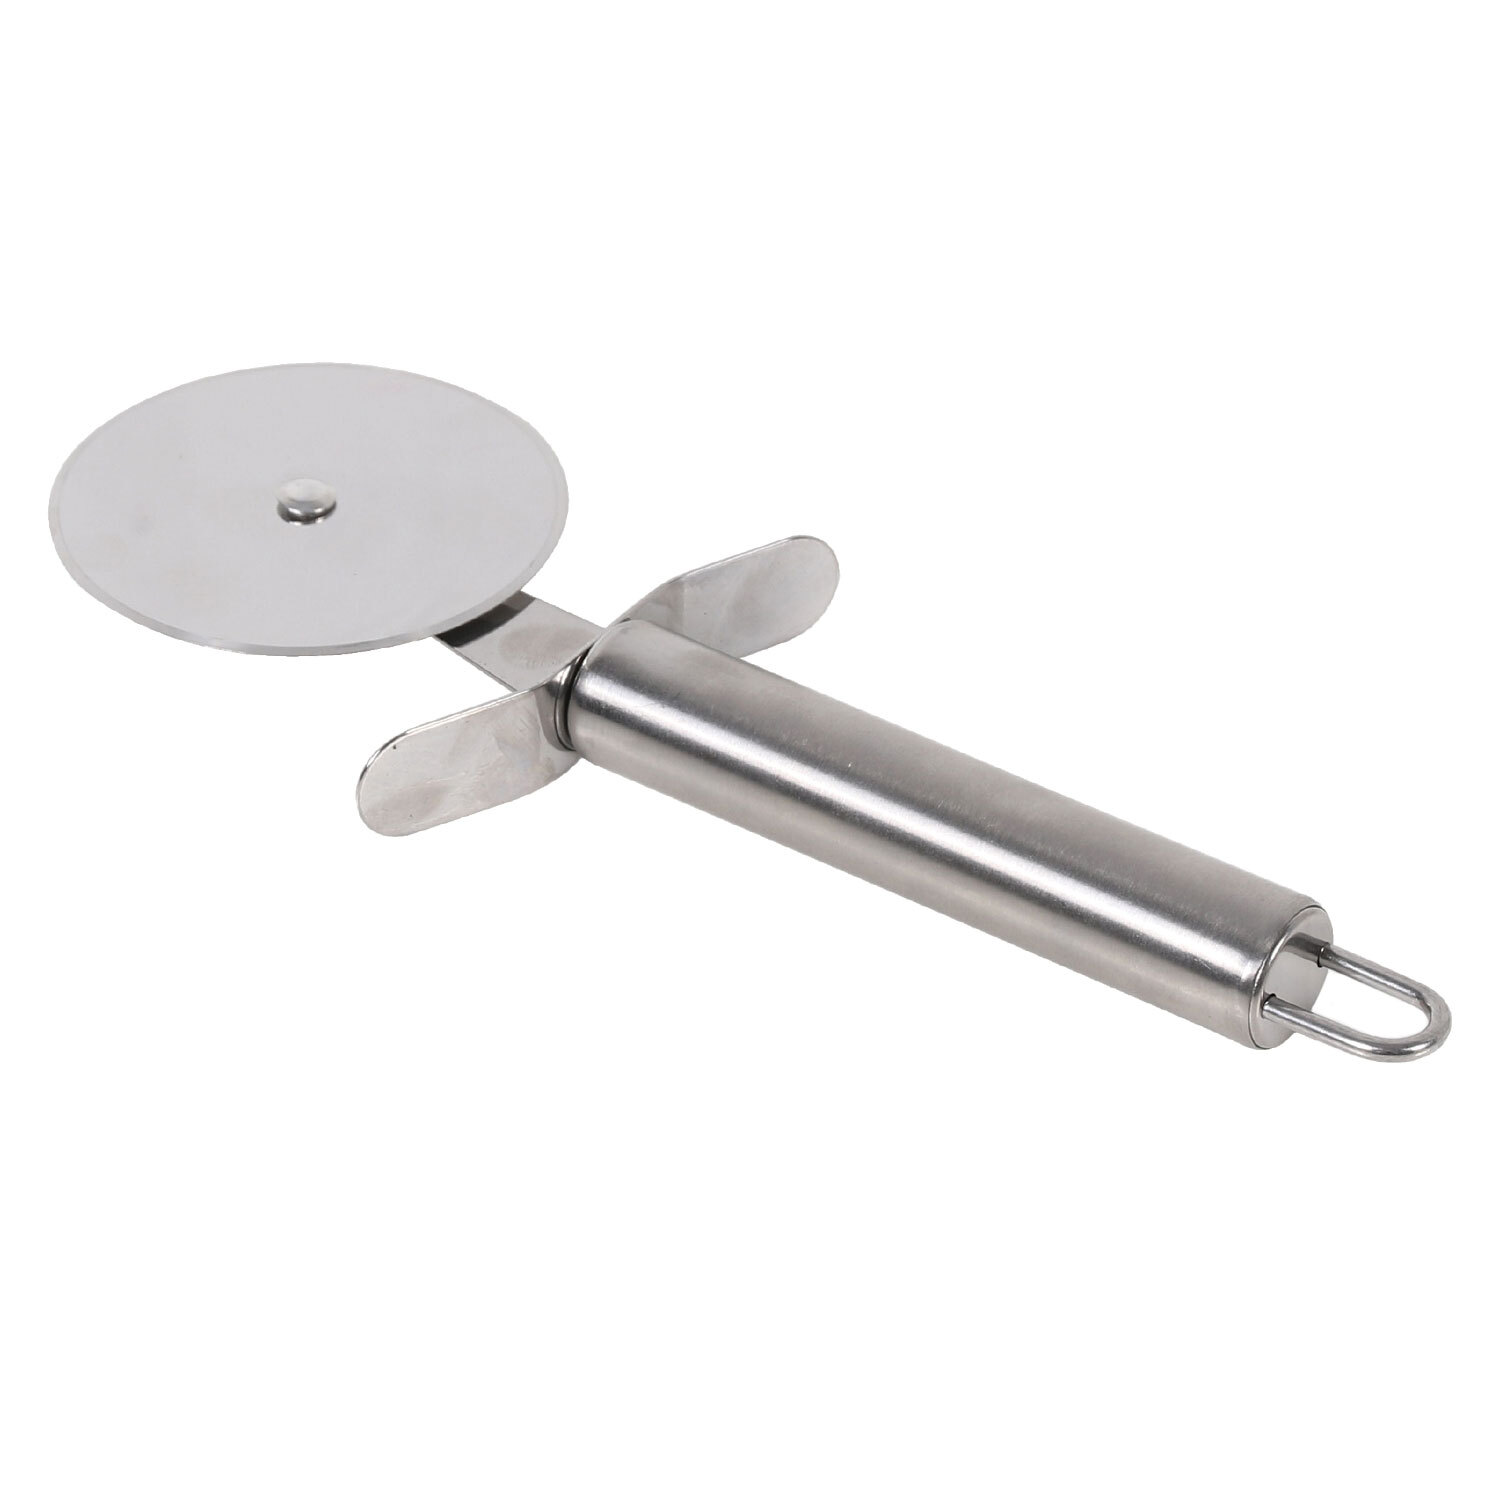 Pizza Wheel Cutter Image